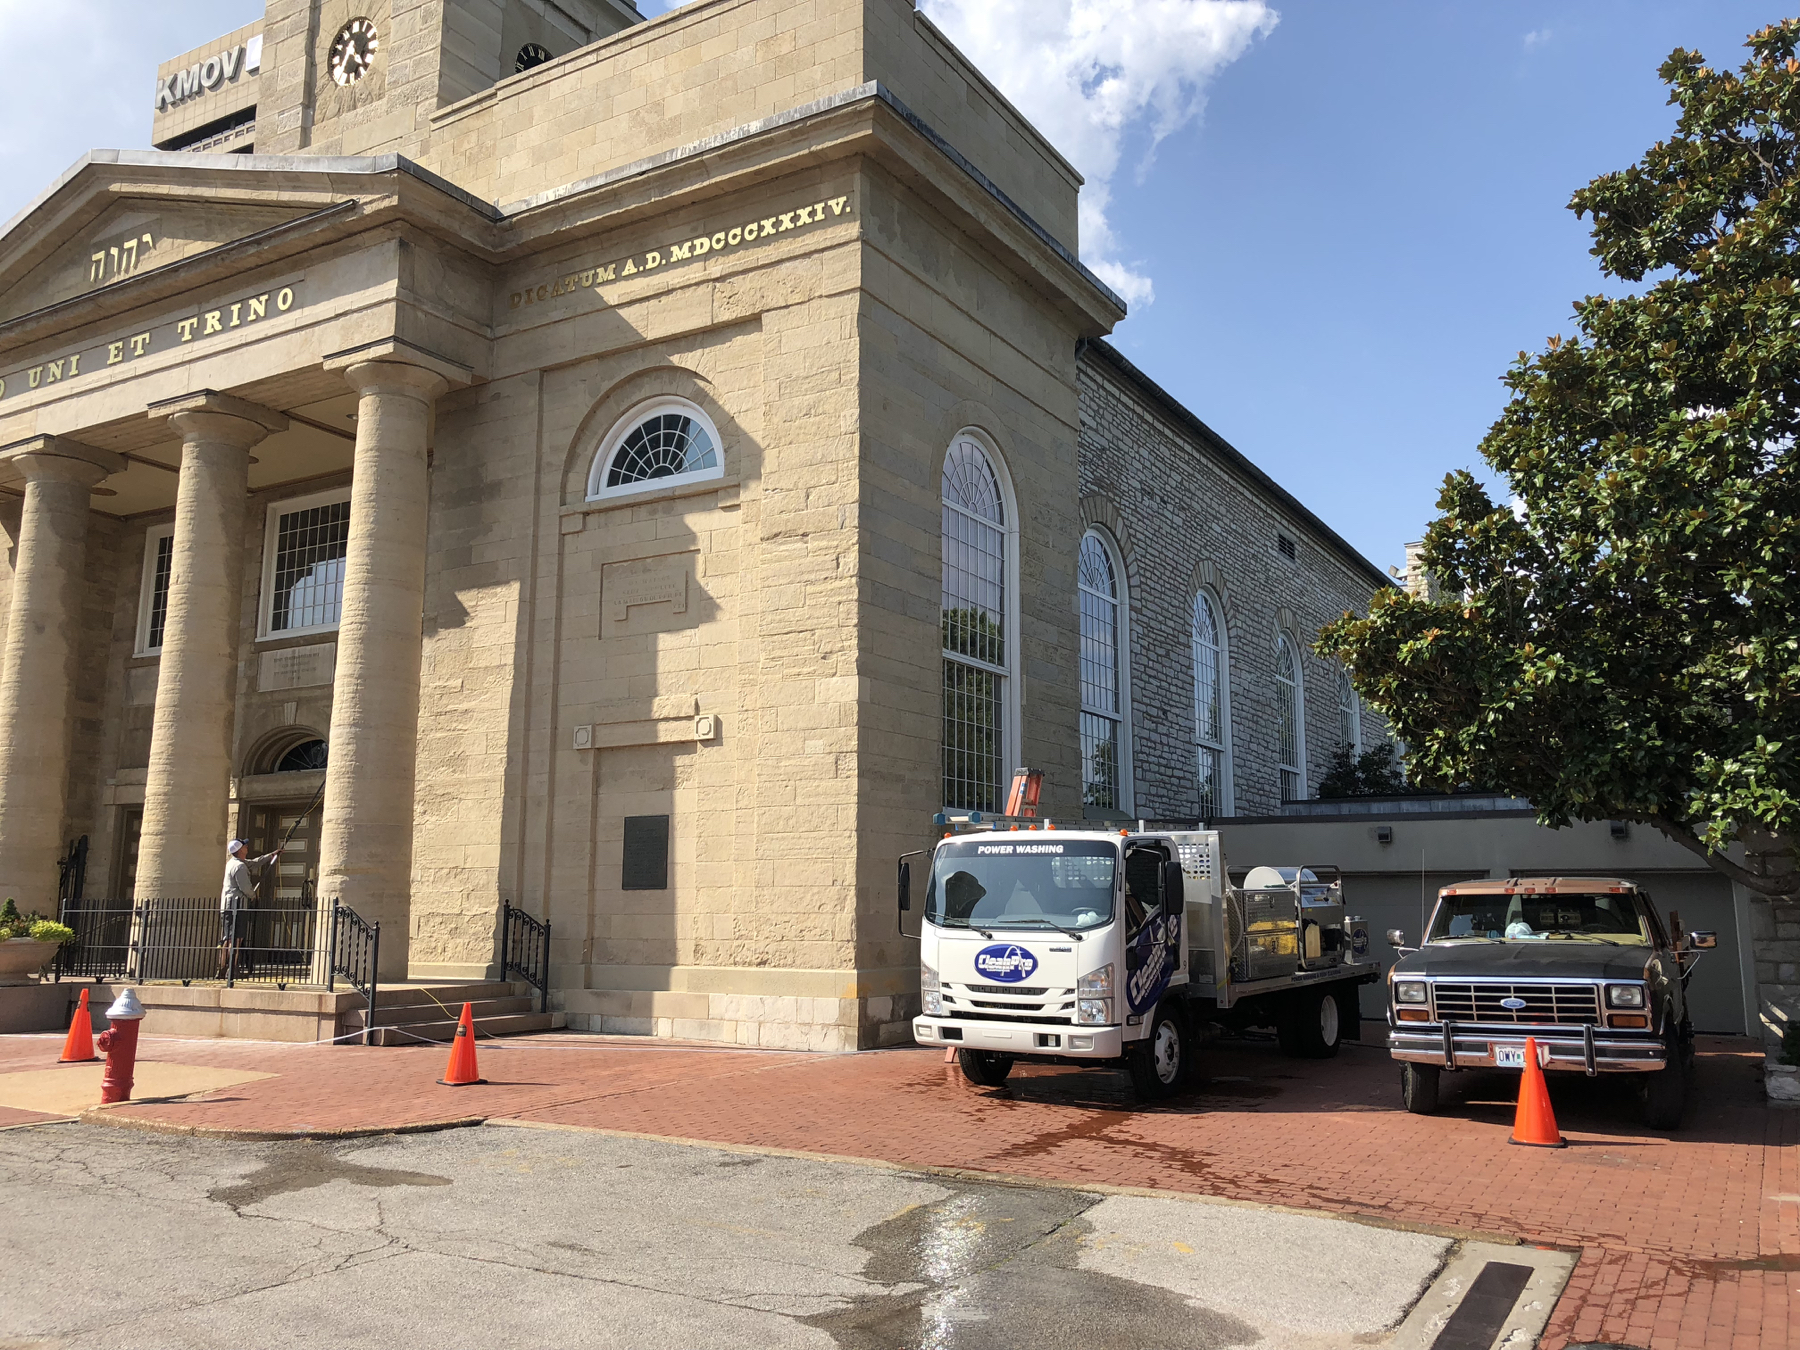 Power Washing Washington Park, IL | Exterior Building Cleaning | Commercial and Residential Pressure Washing Near Washington Park